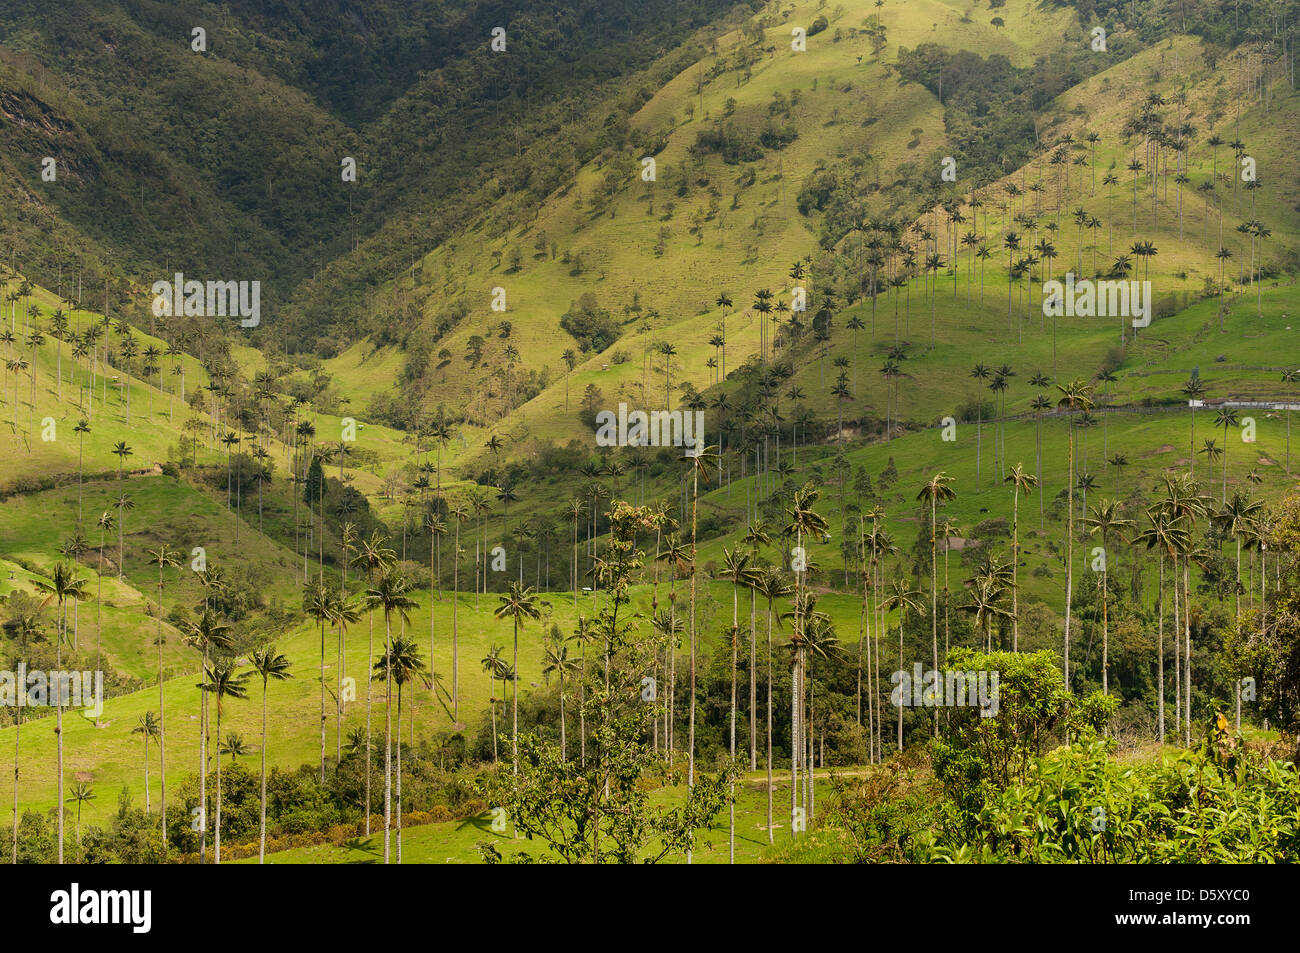 Vax palm trees of Cocora Valley, colombia Stock Photo